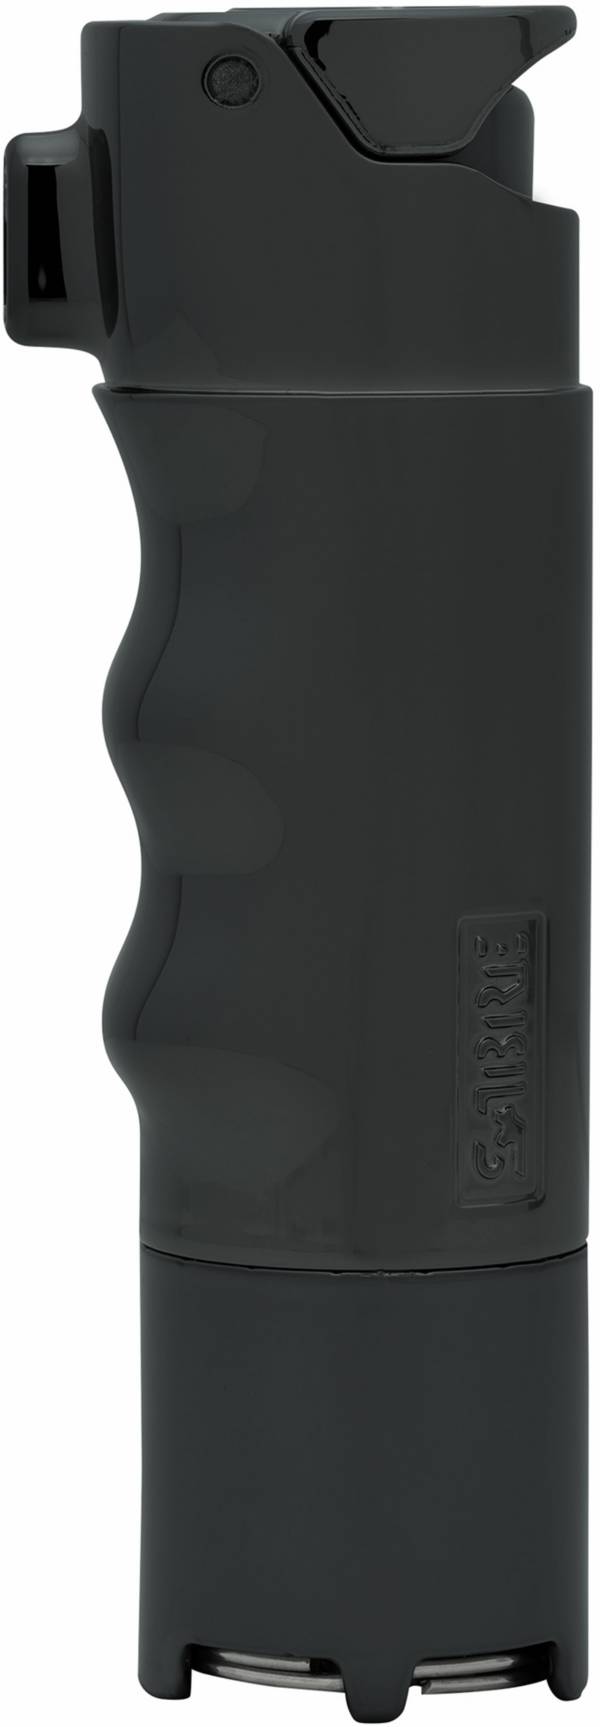 SABRE Smart Pepper Spray product image